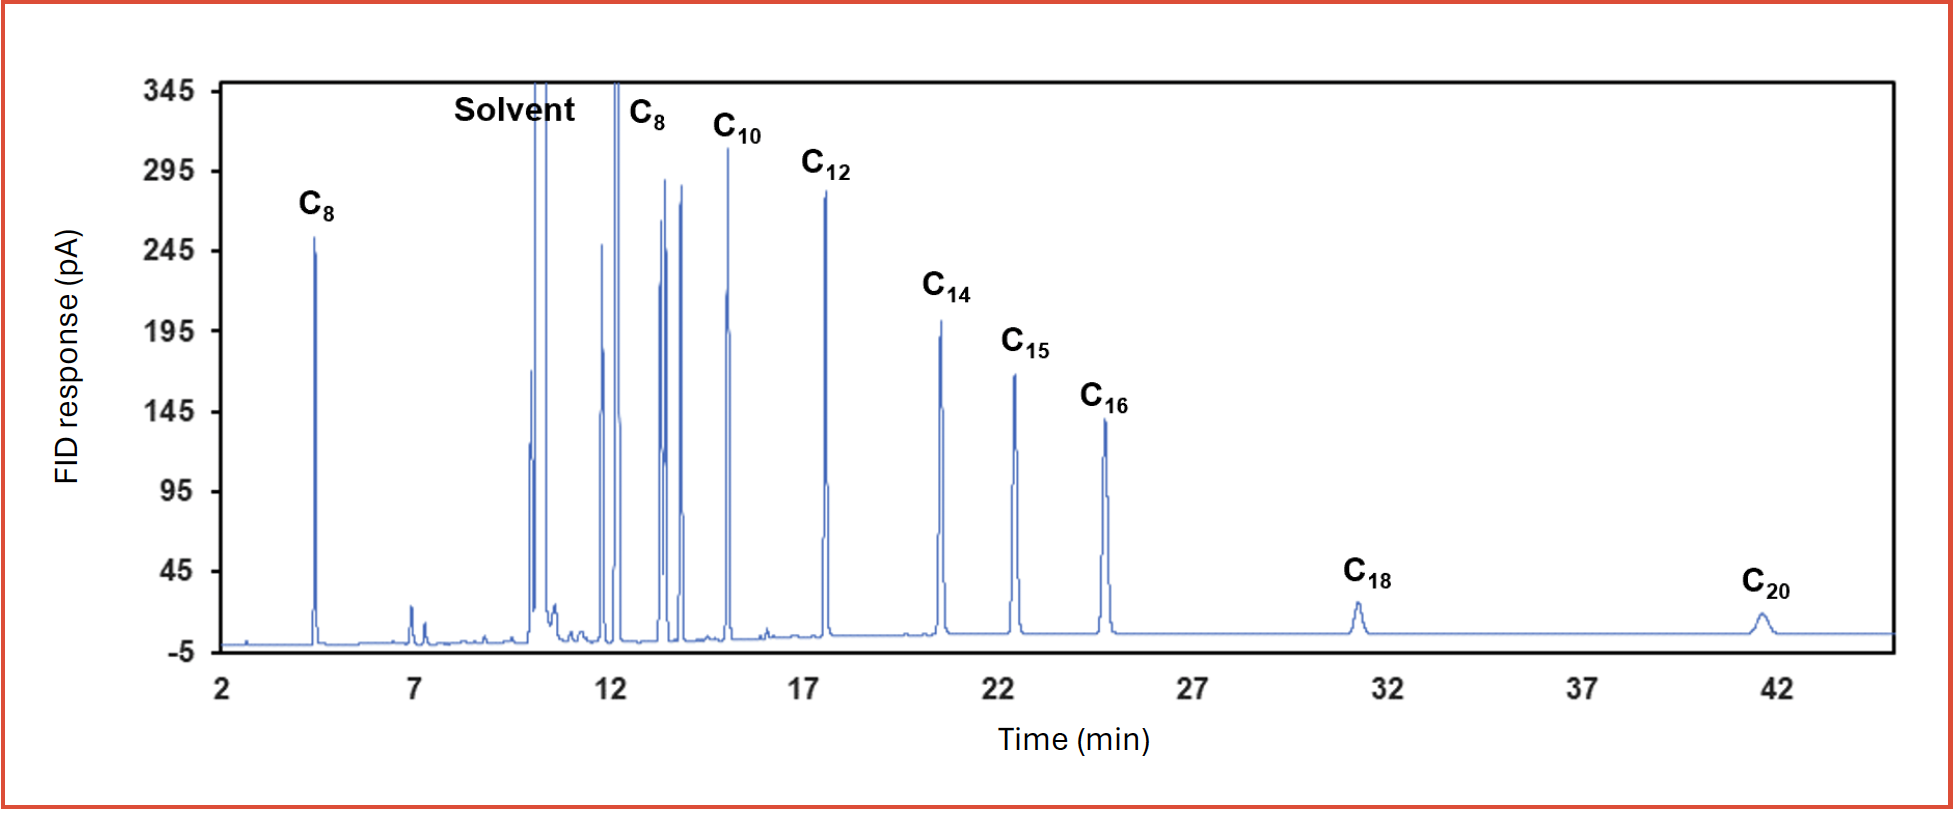 FIGURE 3: Separation of longer chain n-alkanes on PDMS 30 m × 0.25 mm × 5 μm. Standard with 1000 ppm w/w C8, C10, C12, C14, C15, C16, and 200 ppm w/w C18, C20, C22, C24 in cyclohexane was used.